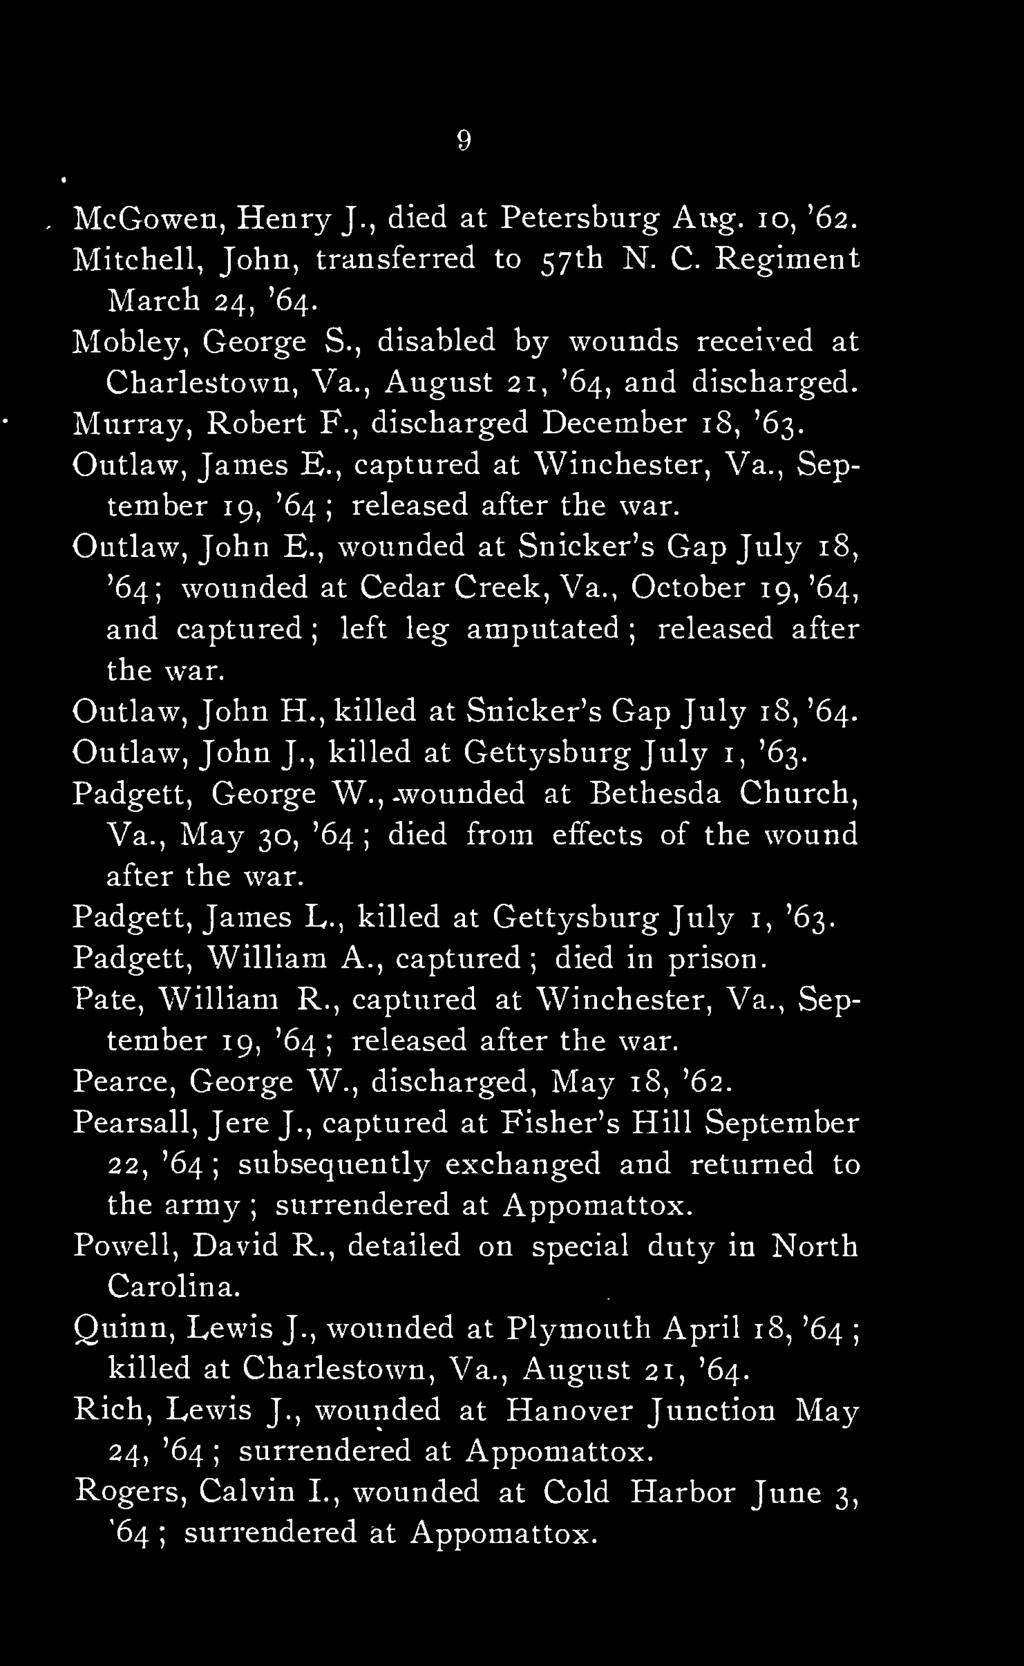 , wounded at Snicker's Gap July 18, '64 wounded at Cedar Creek, Va., October 19, '64, and captured left leg amputated released after the war. Outlaw, John H., killed at Snicker's Gap July 18, '64.